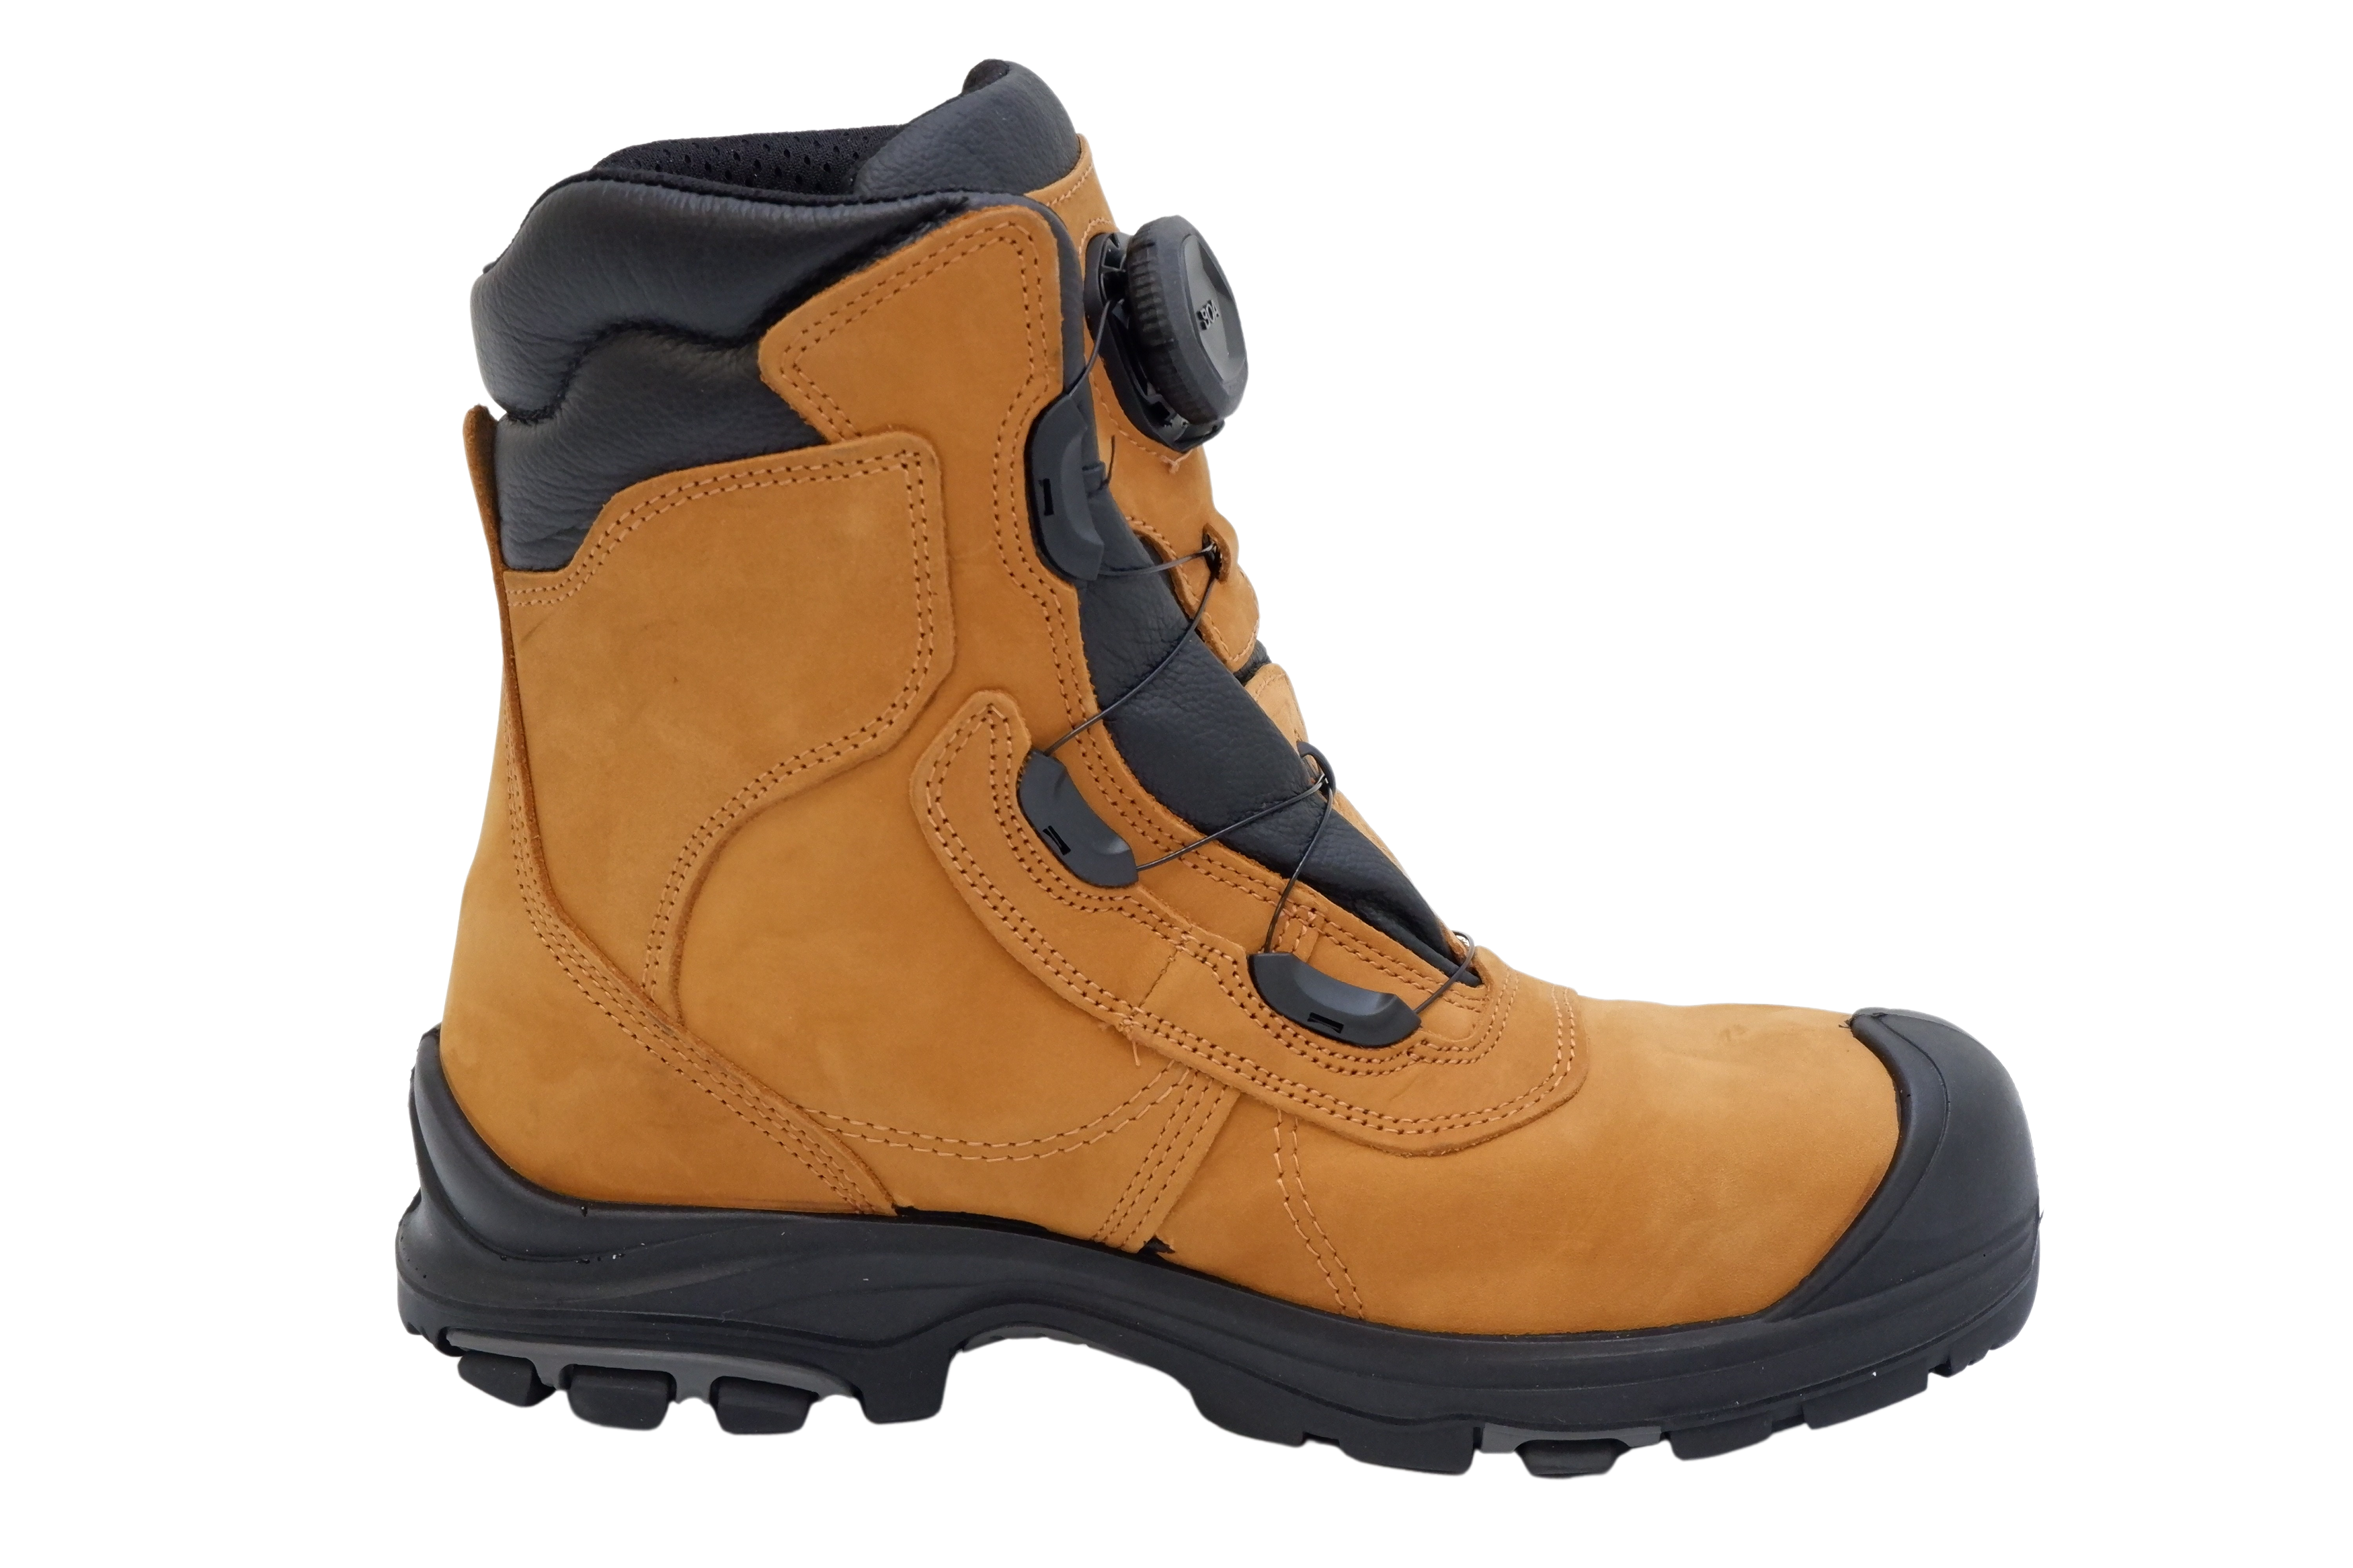 Grisport Men's Safety Work Boots BOA Desert 8" Waterproof with Vibram® Sole and Perforated Steel Toe Cap Sizes 7-13